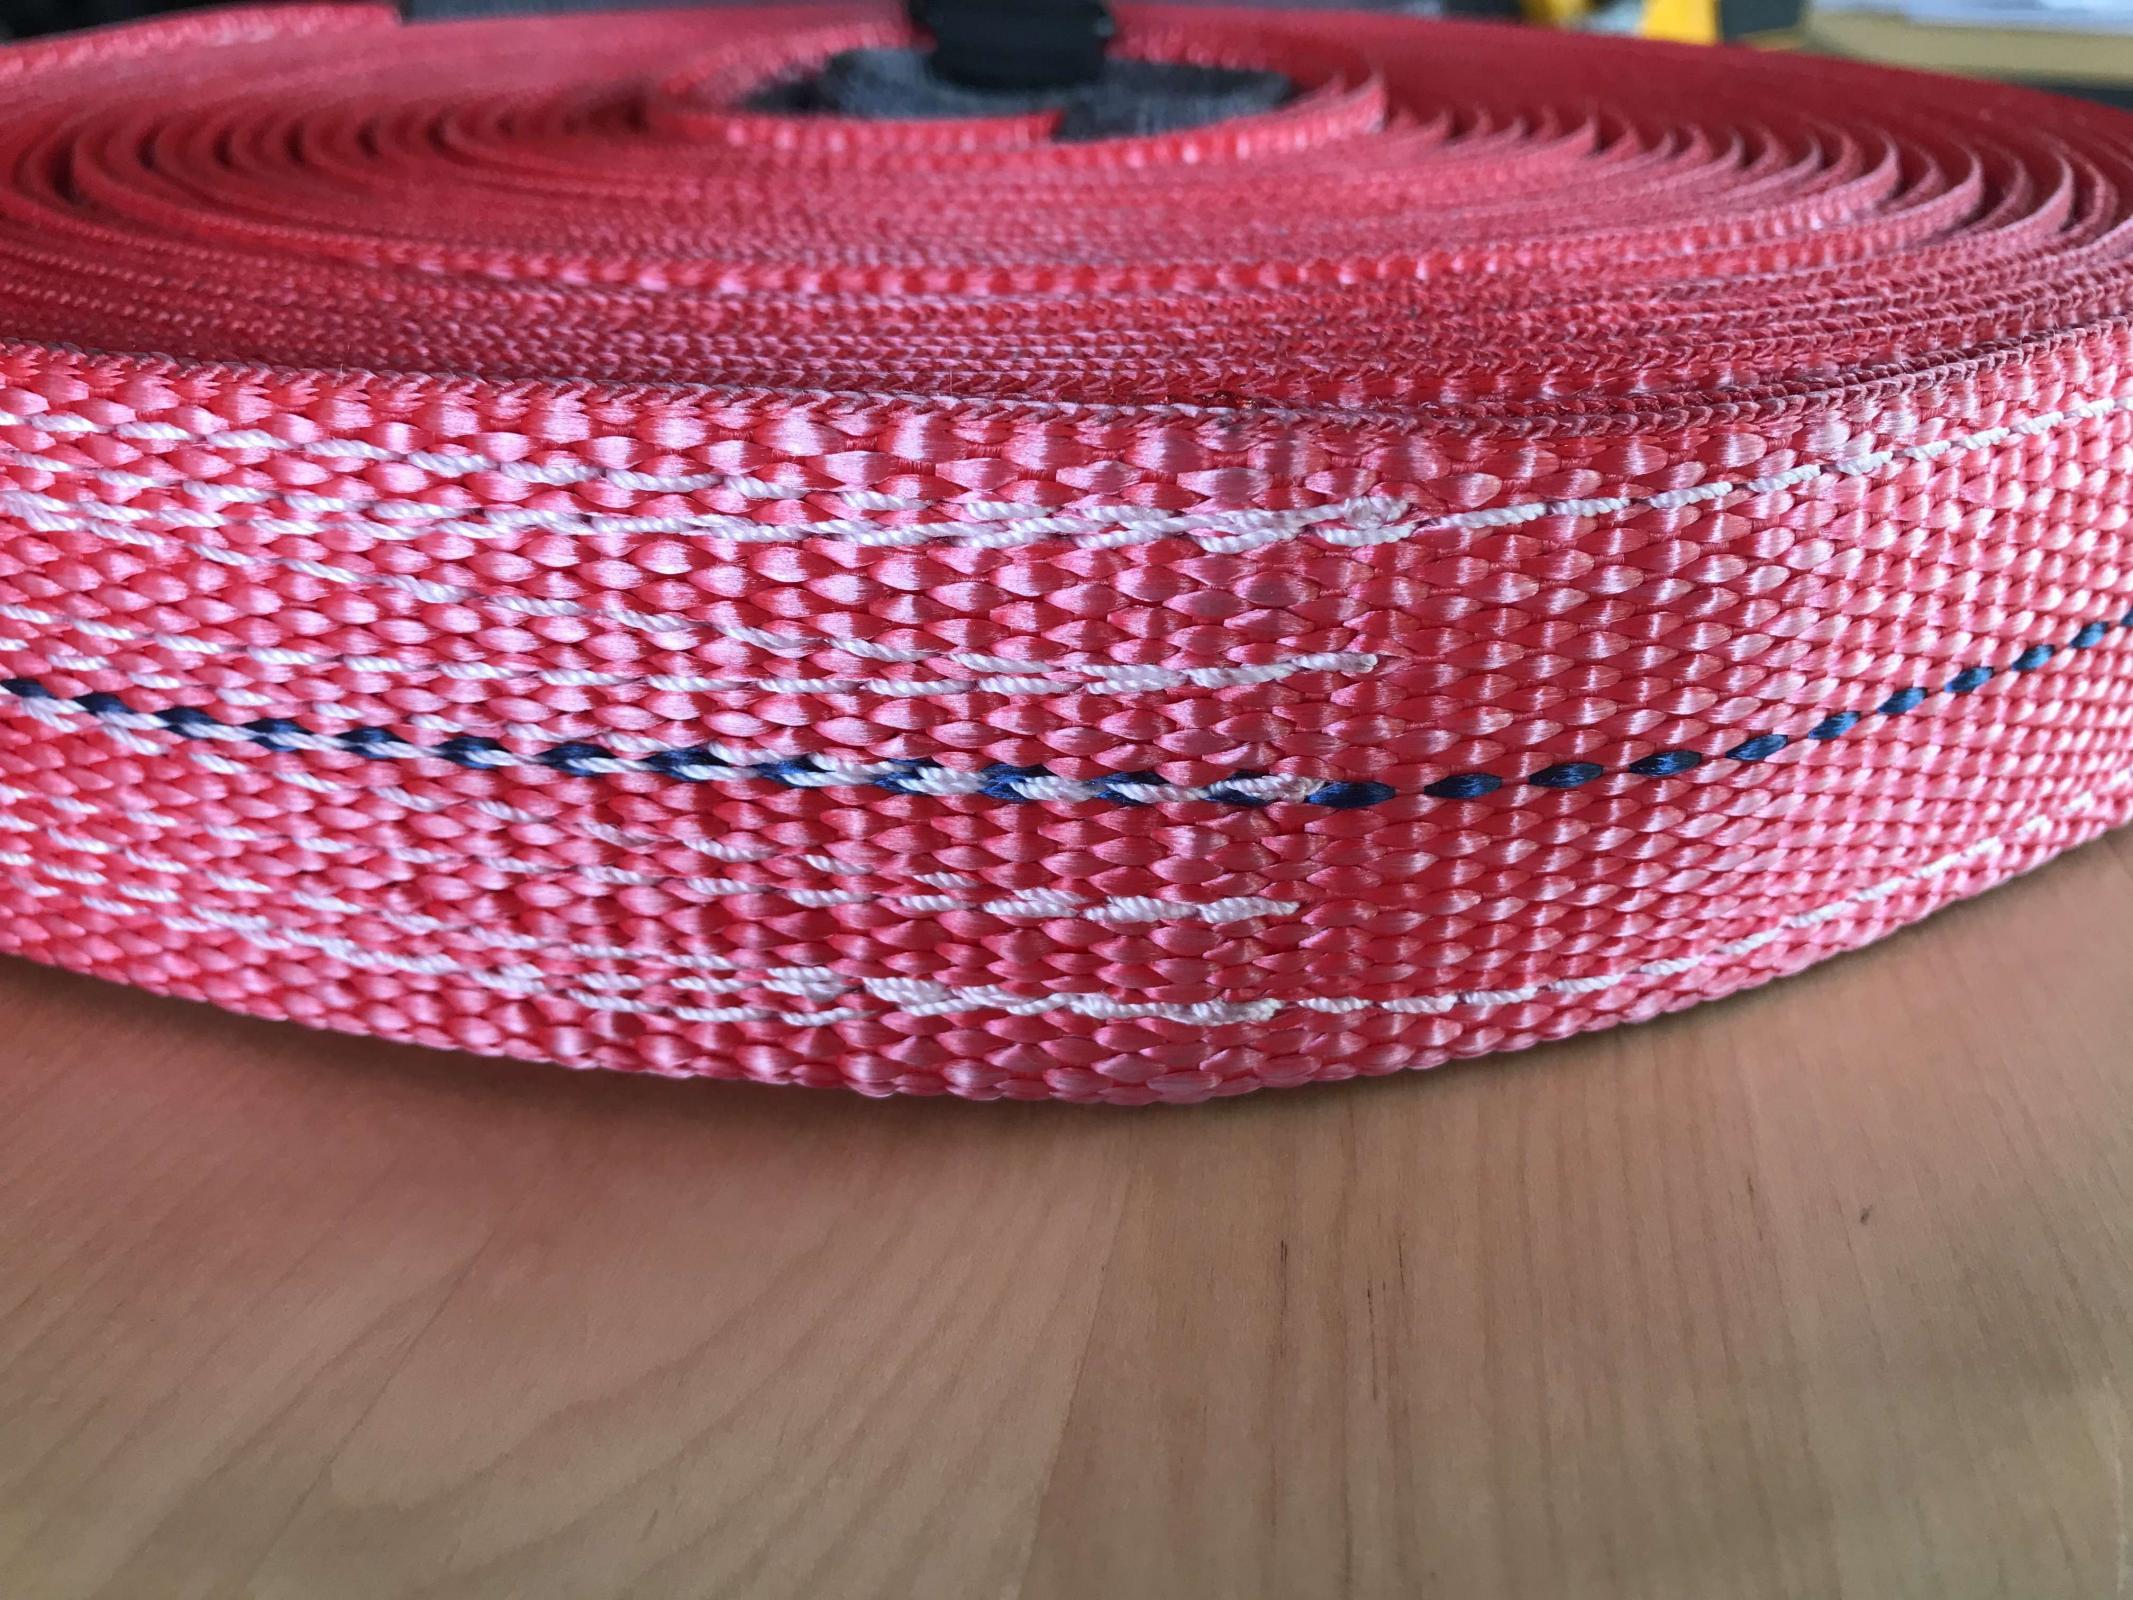 Factor 55 30 Foot Tow Strap Standard Duty 30 Foot x 2 Inch Red Factor 55 - Click Image to Close